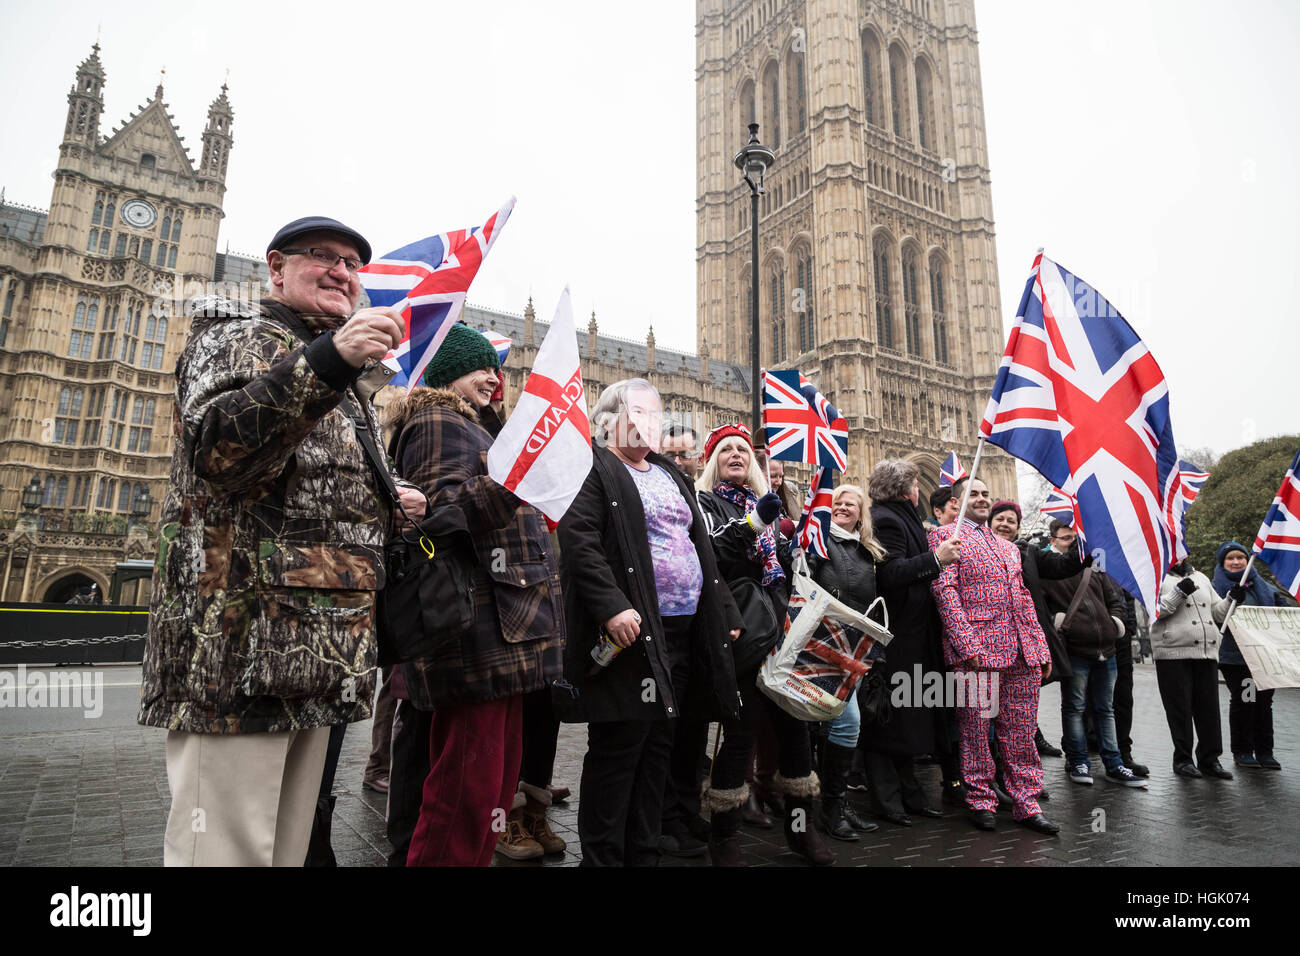 London, UK. 23rd January, 2017. Pro-Brexit rally with a colourful display of British flags outside Westminster’s Parliament Buildings. Organised by UKIP, the Brexit supporters are demanding MPs and Parliament implement the EU Referendum vote to leave Europe without further delay. © Guy Corbishley/Alamy Live News Stock Photo